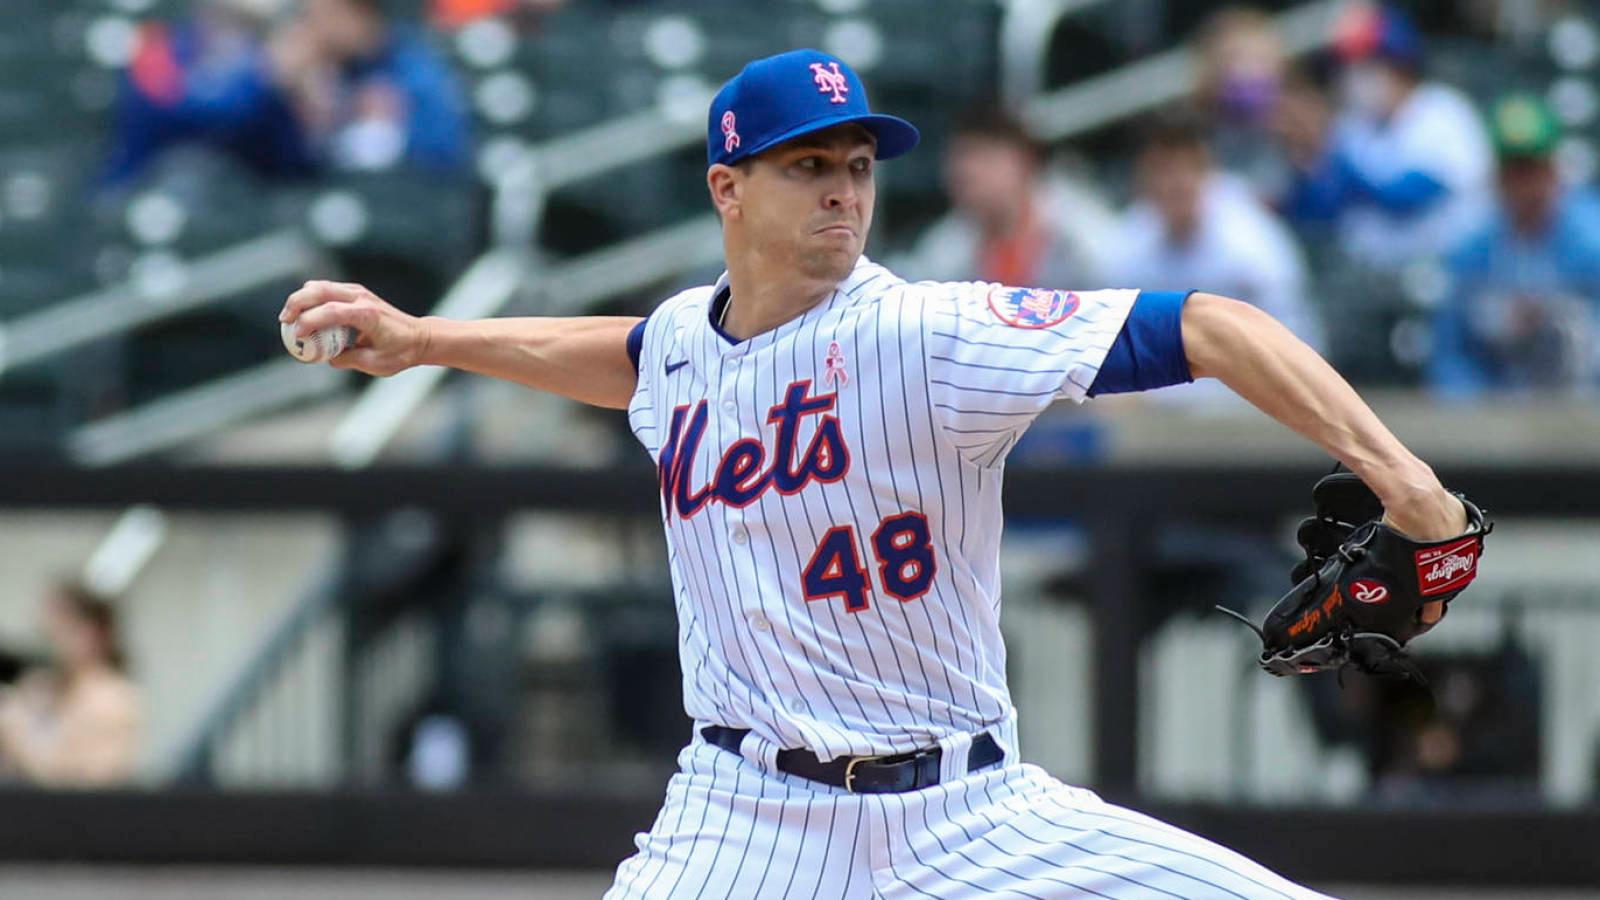 Mets’ ace Jacob deGrom rides his repertoire to the top of the NL MVP lists